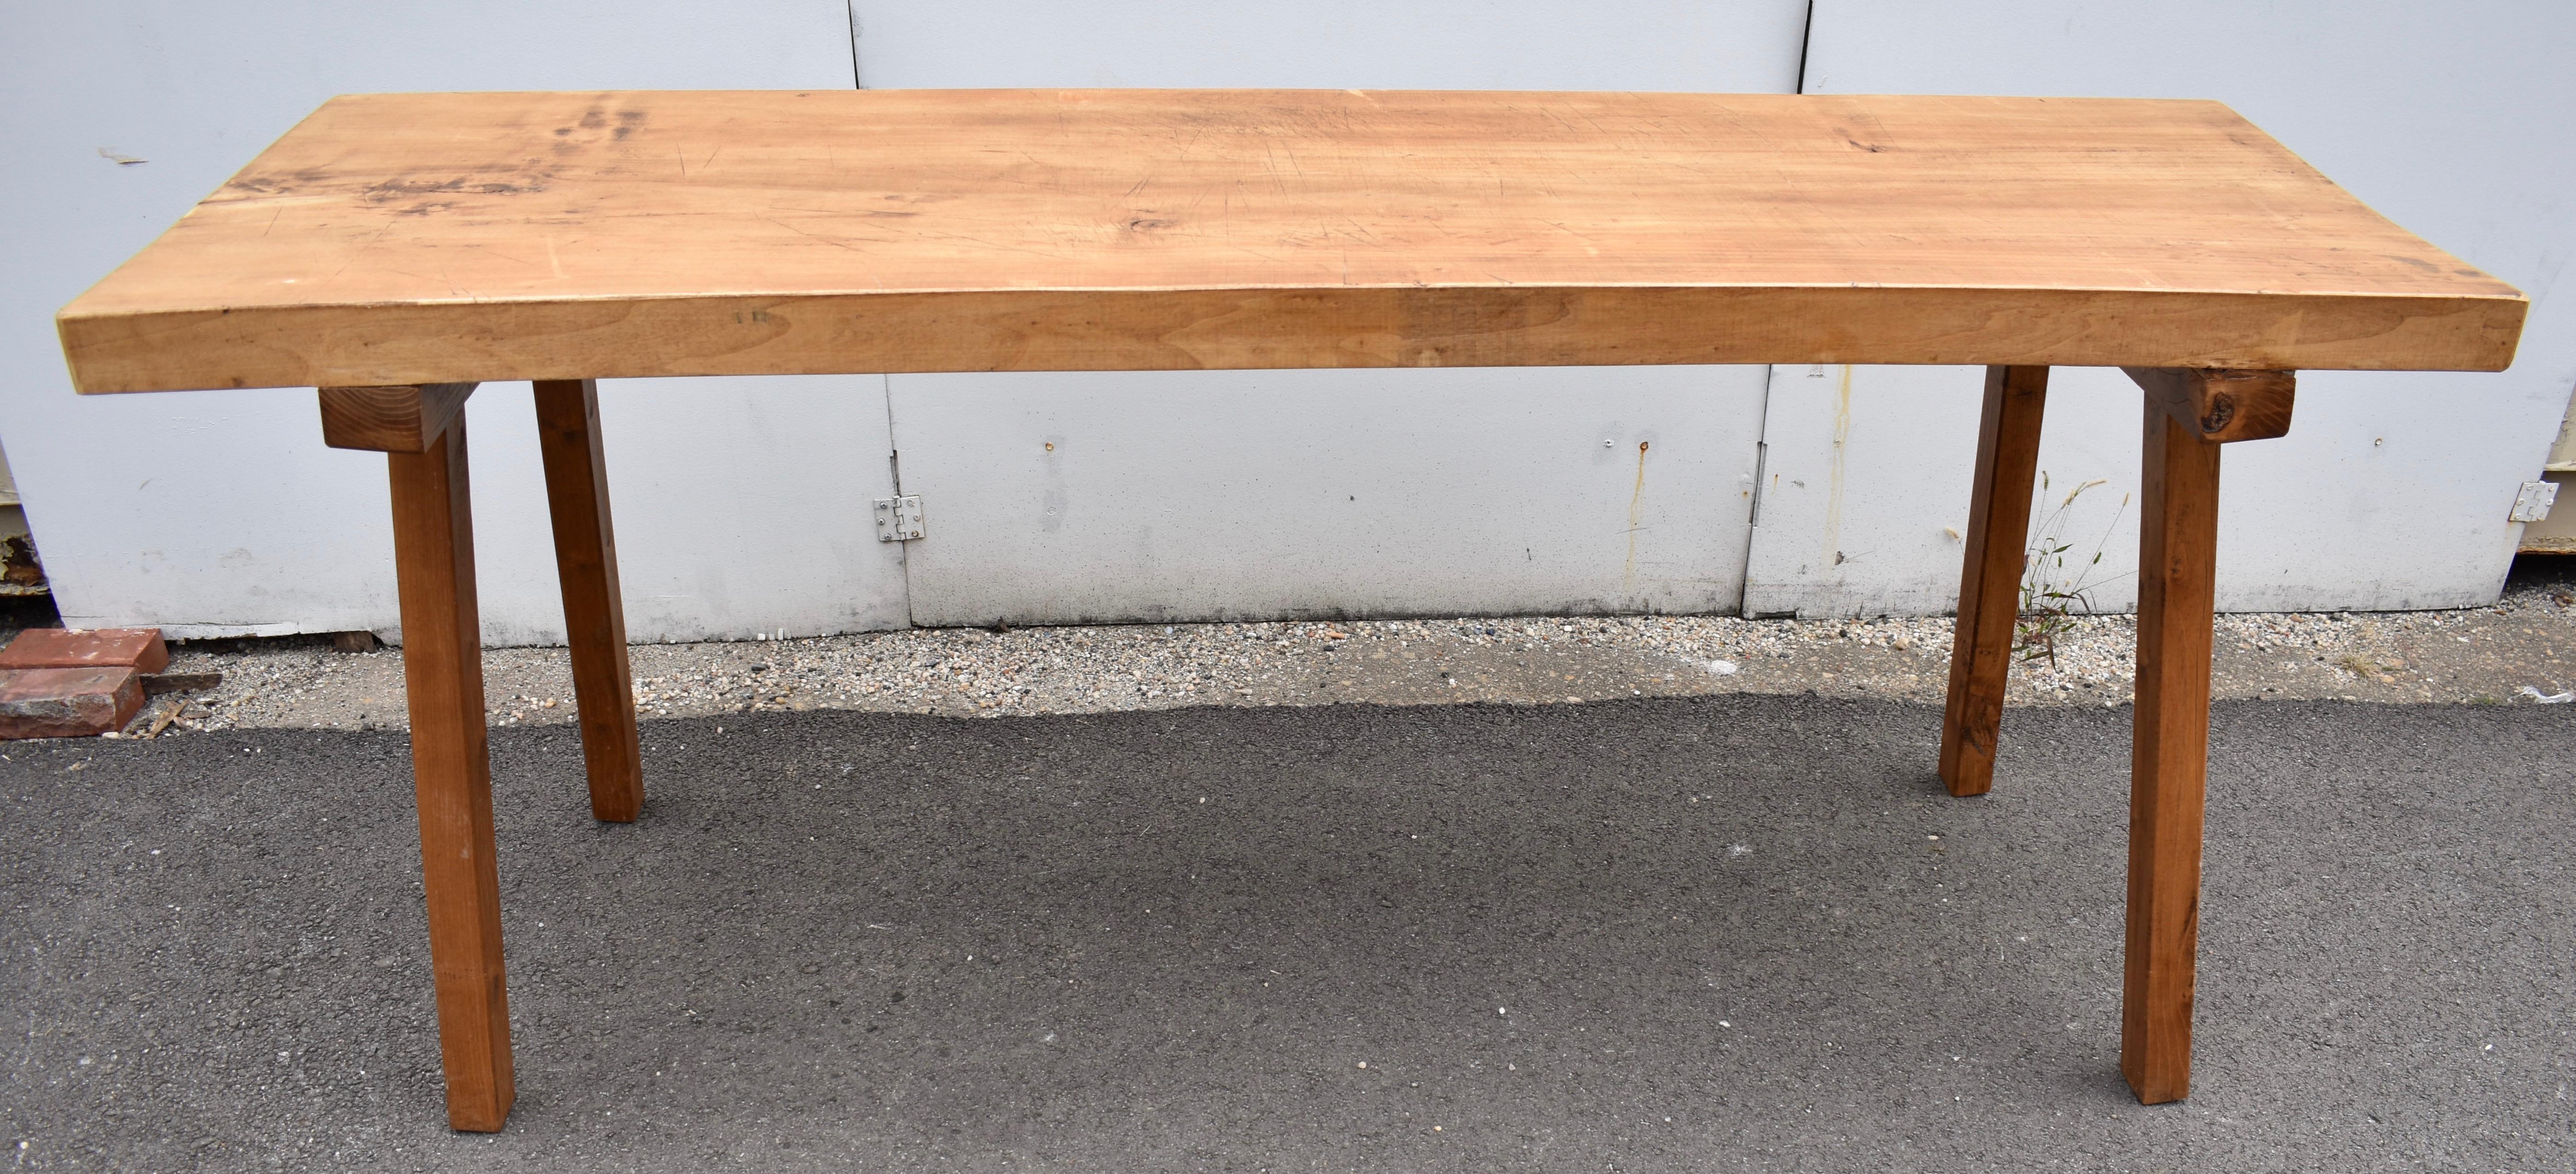 The top of this outstanding Pig Bench Table is a single massive slab of Elm three inches thick and over six and a half feet long.  The square legs are oak, inserted into oak cleats, splayed for stability, which are then firmly attached to the